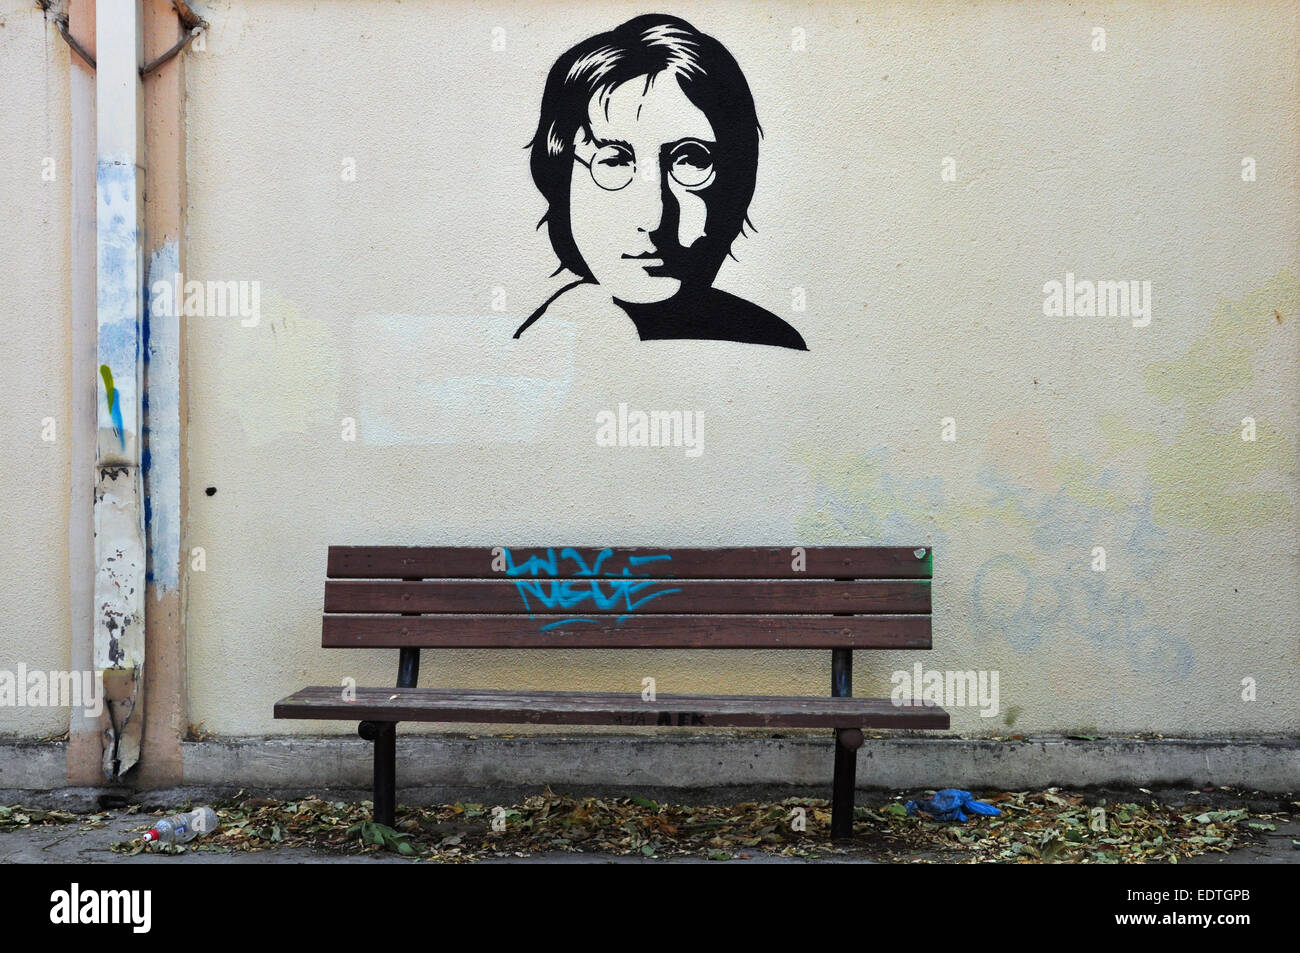 Famous musician John Lennon from The Beatles portrait stencil graffiti on  textured wall and wooden bench Stock Photo - Alamy